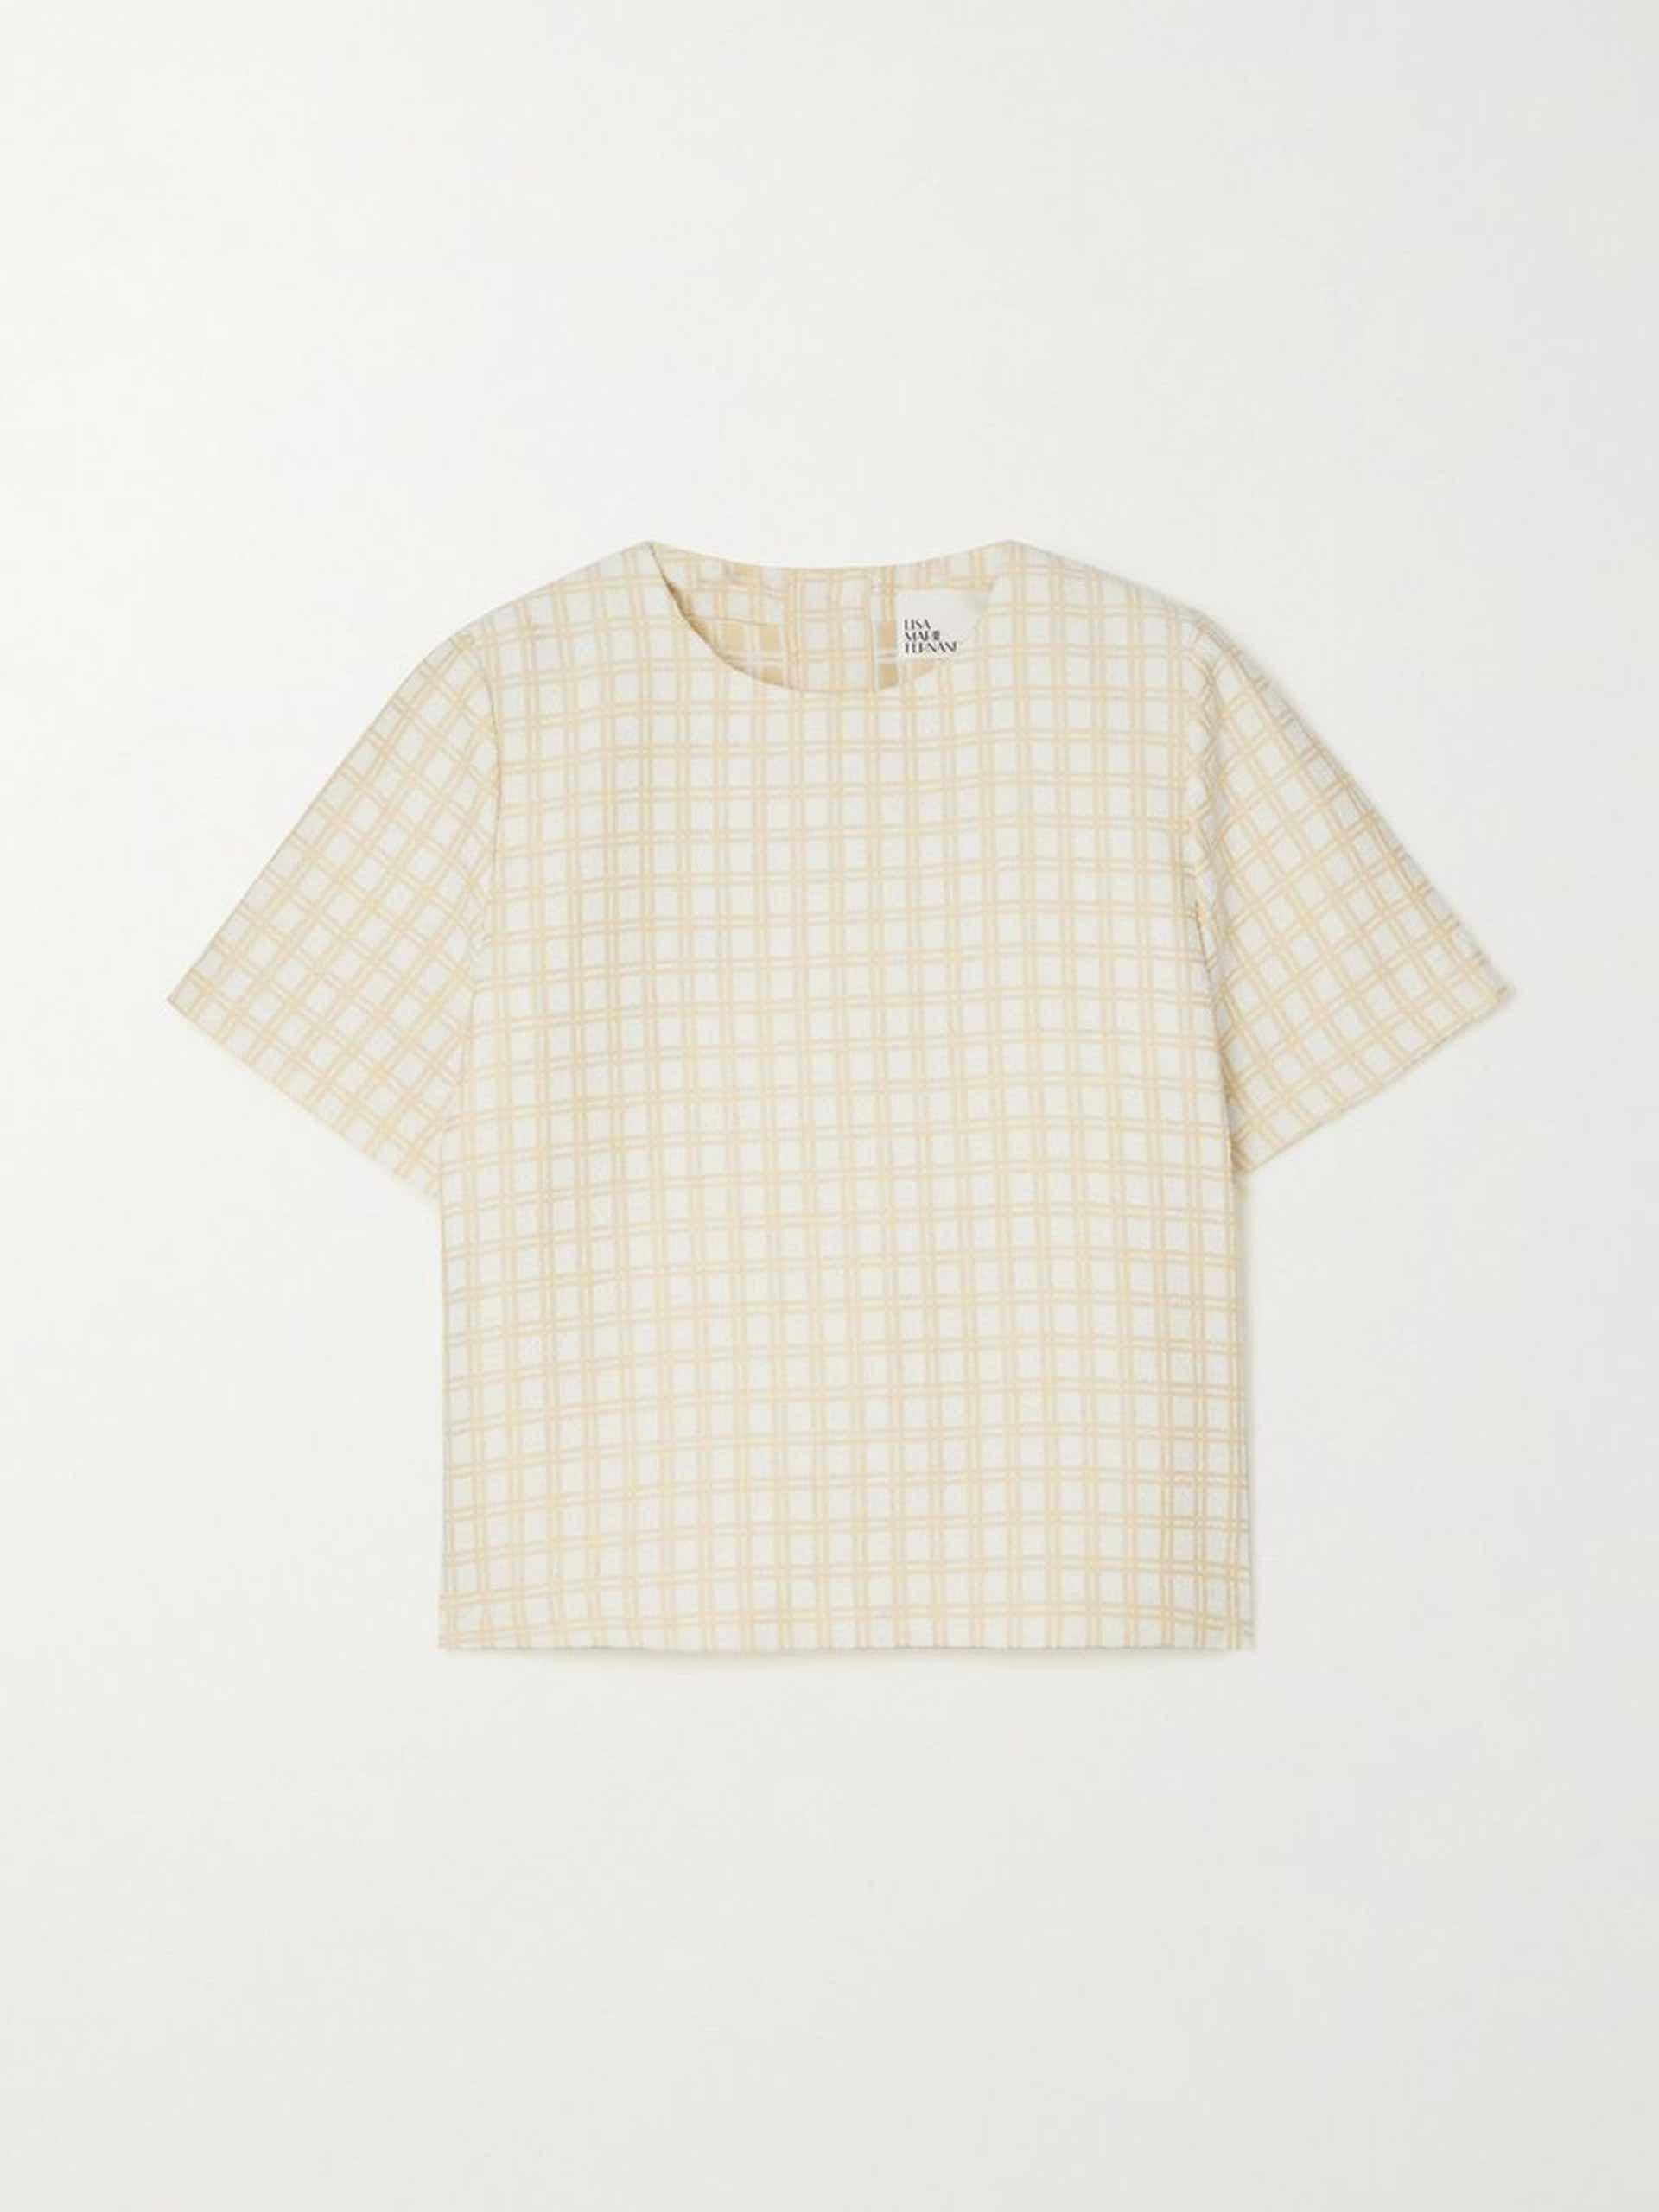 White and yellow checked top